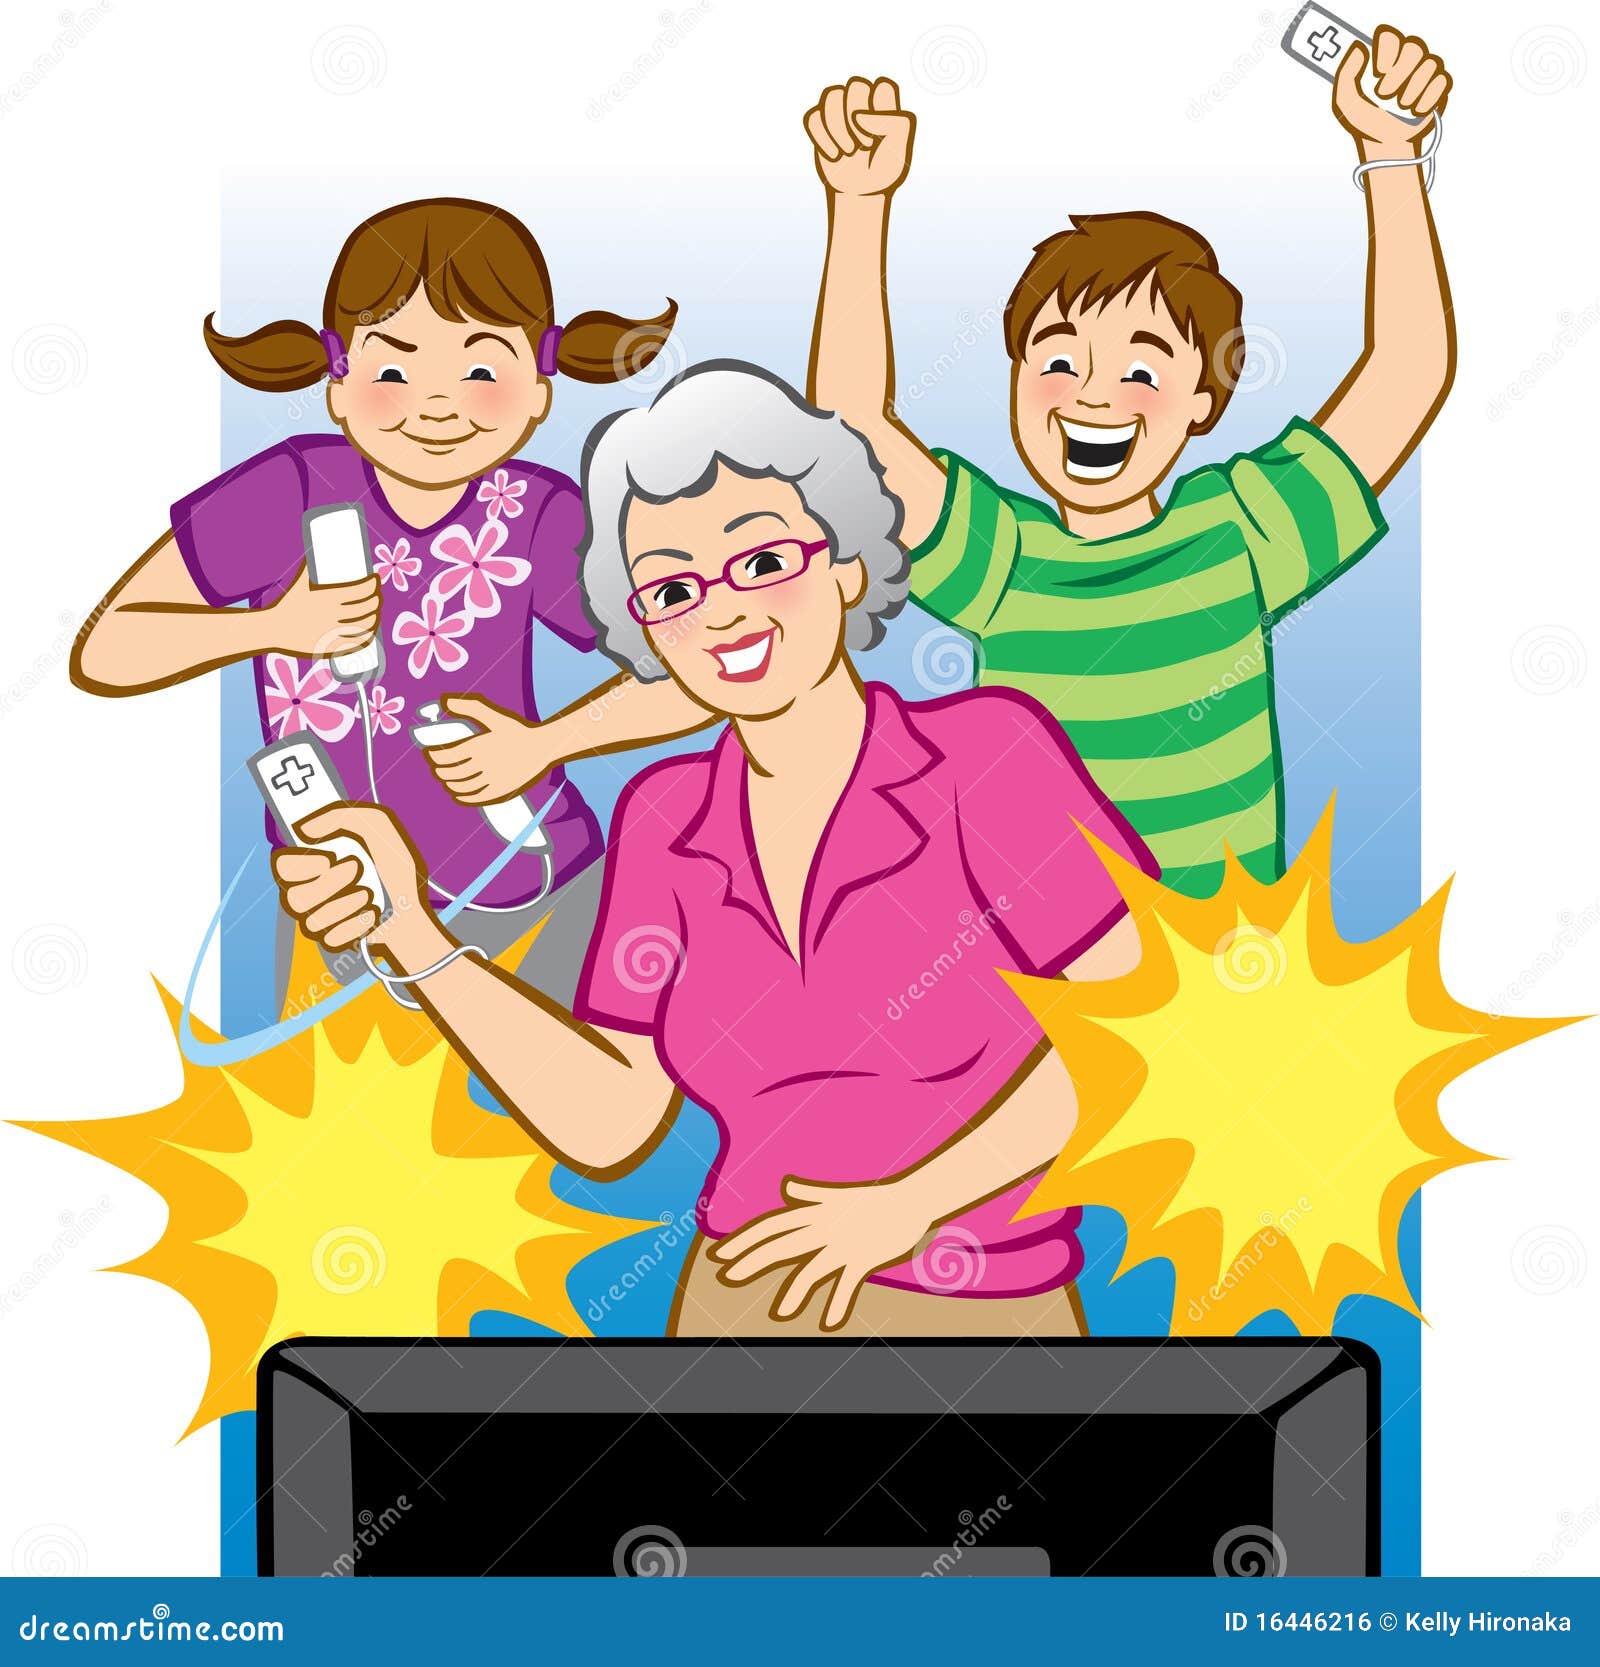 child playing video games clipart - photo #40